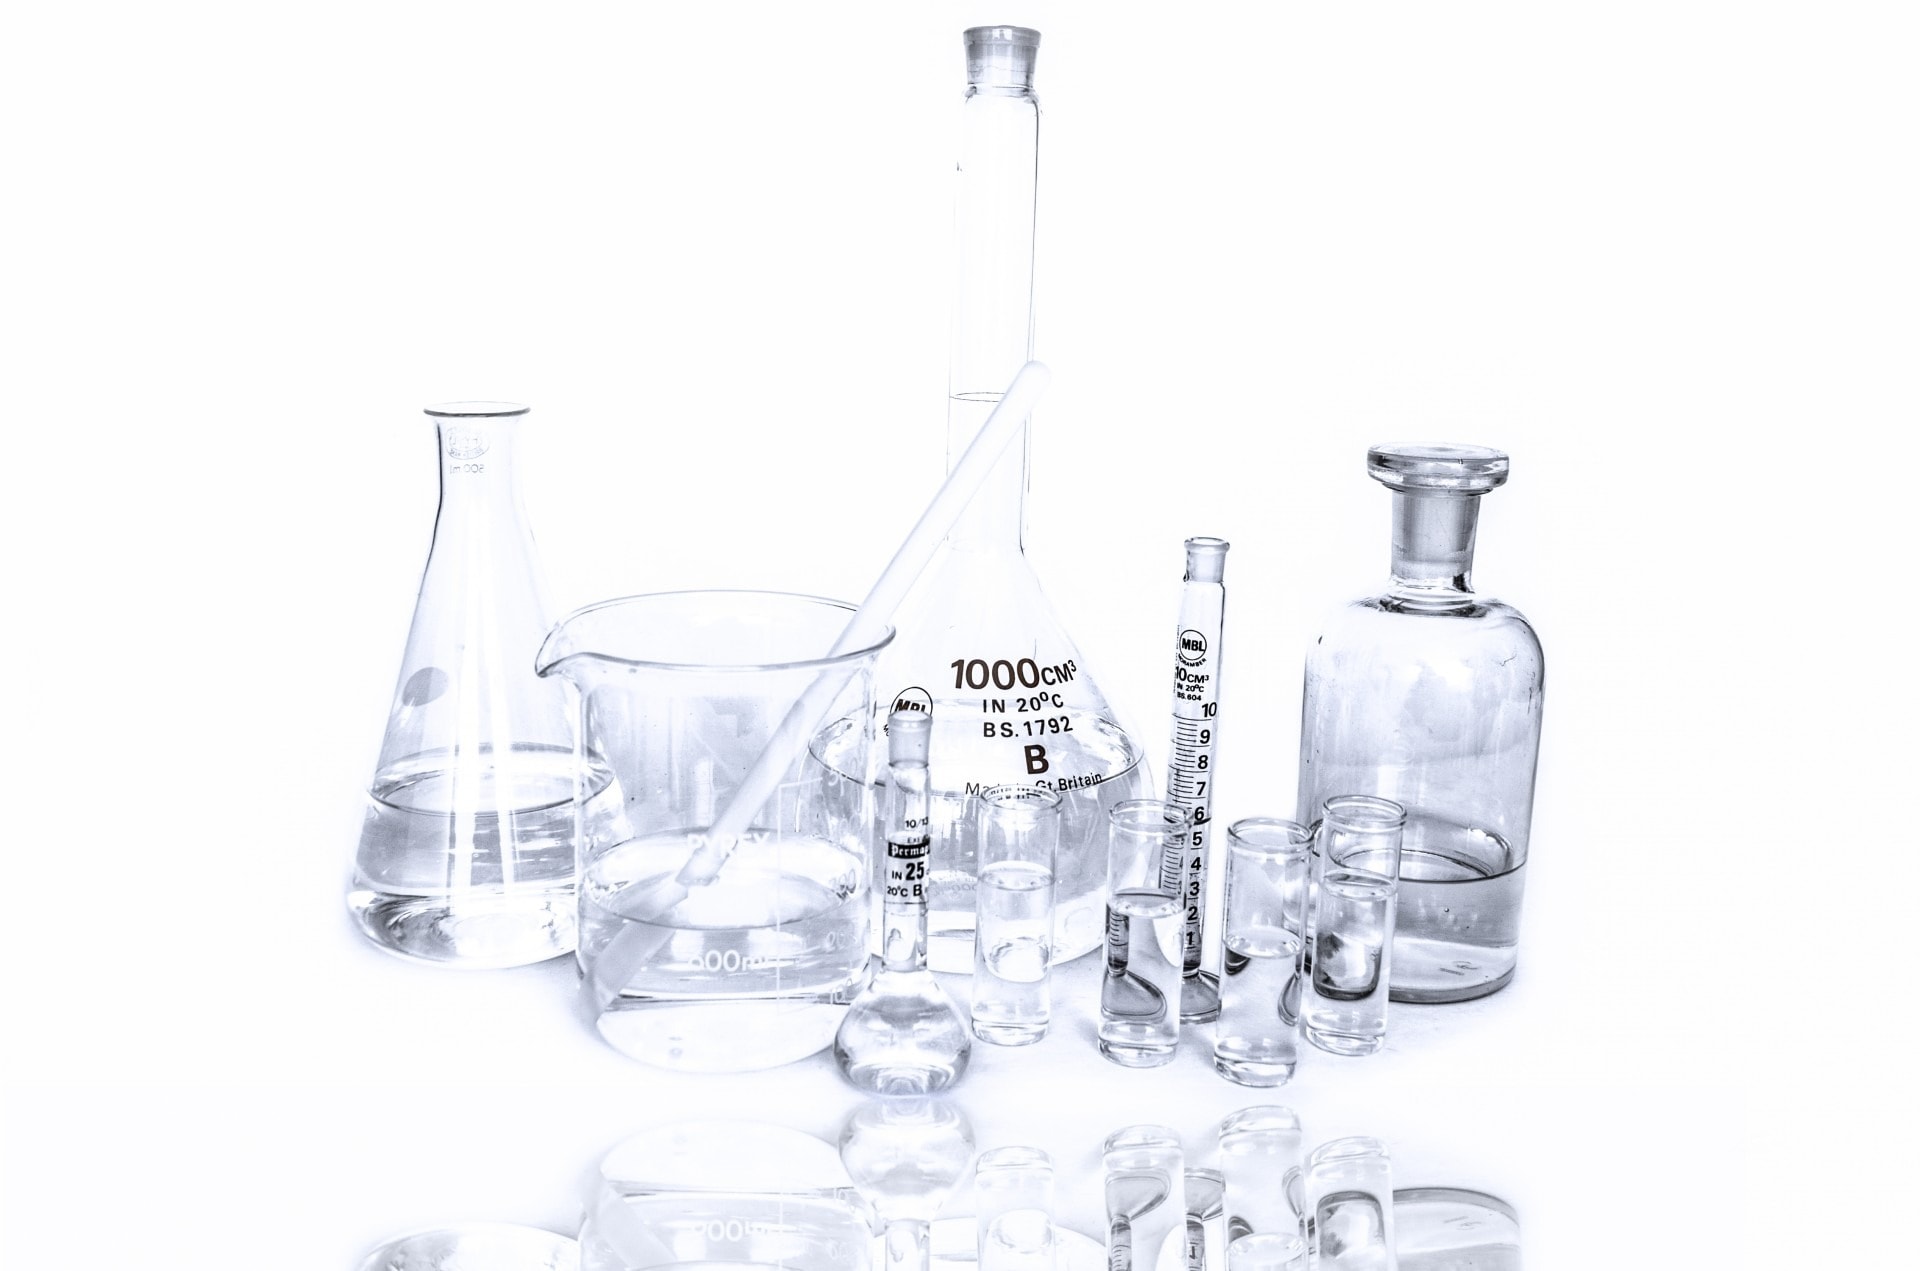 Advanced lab equipment for testing trace elements